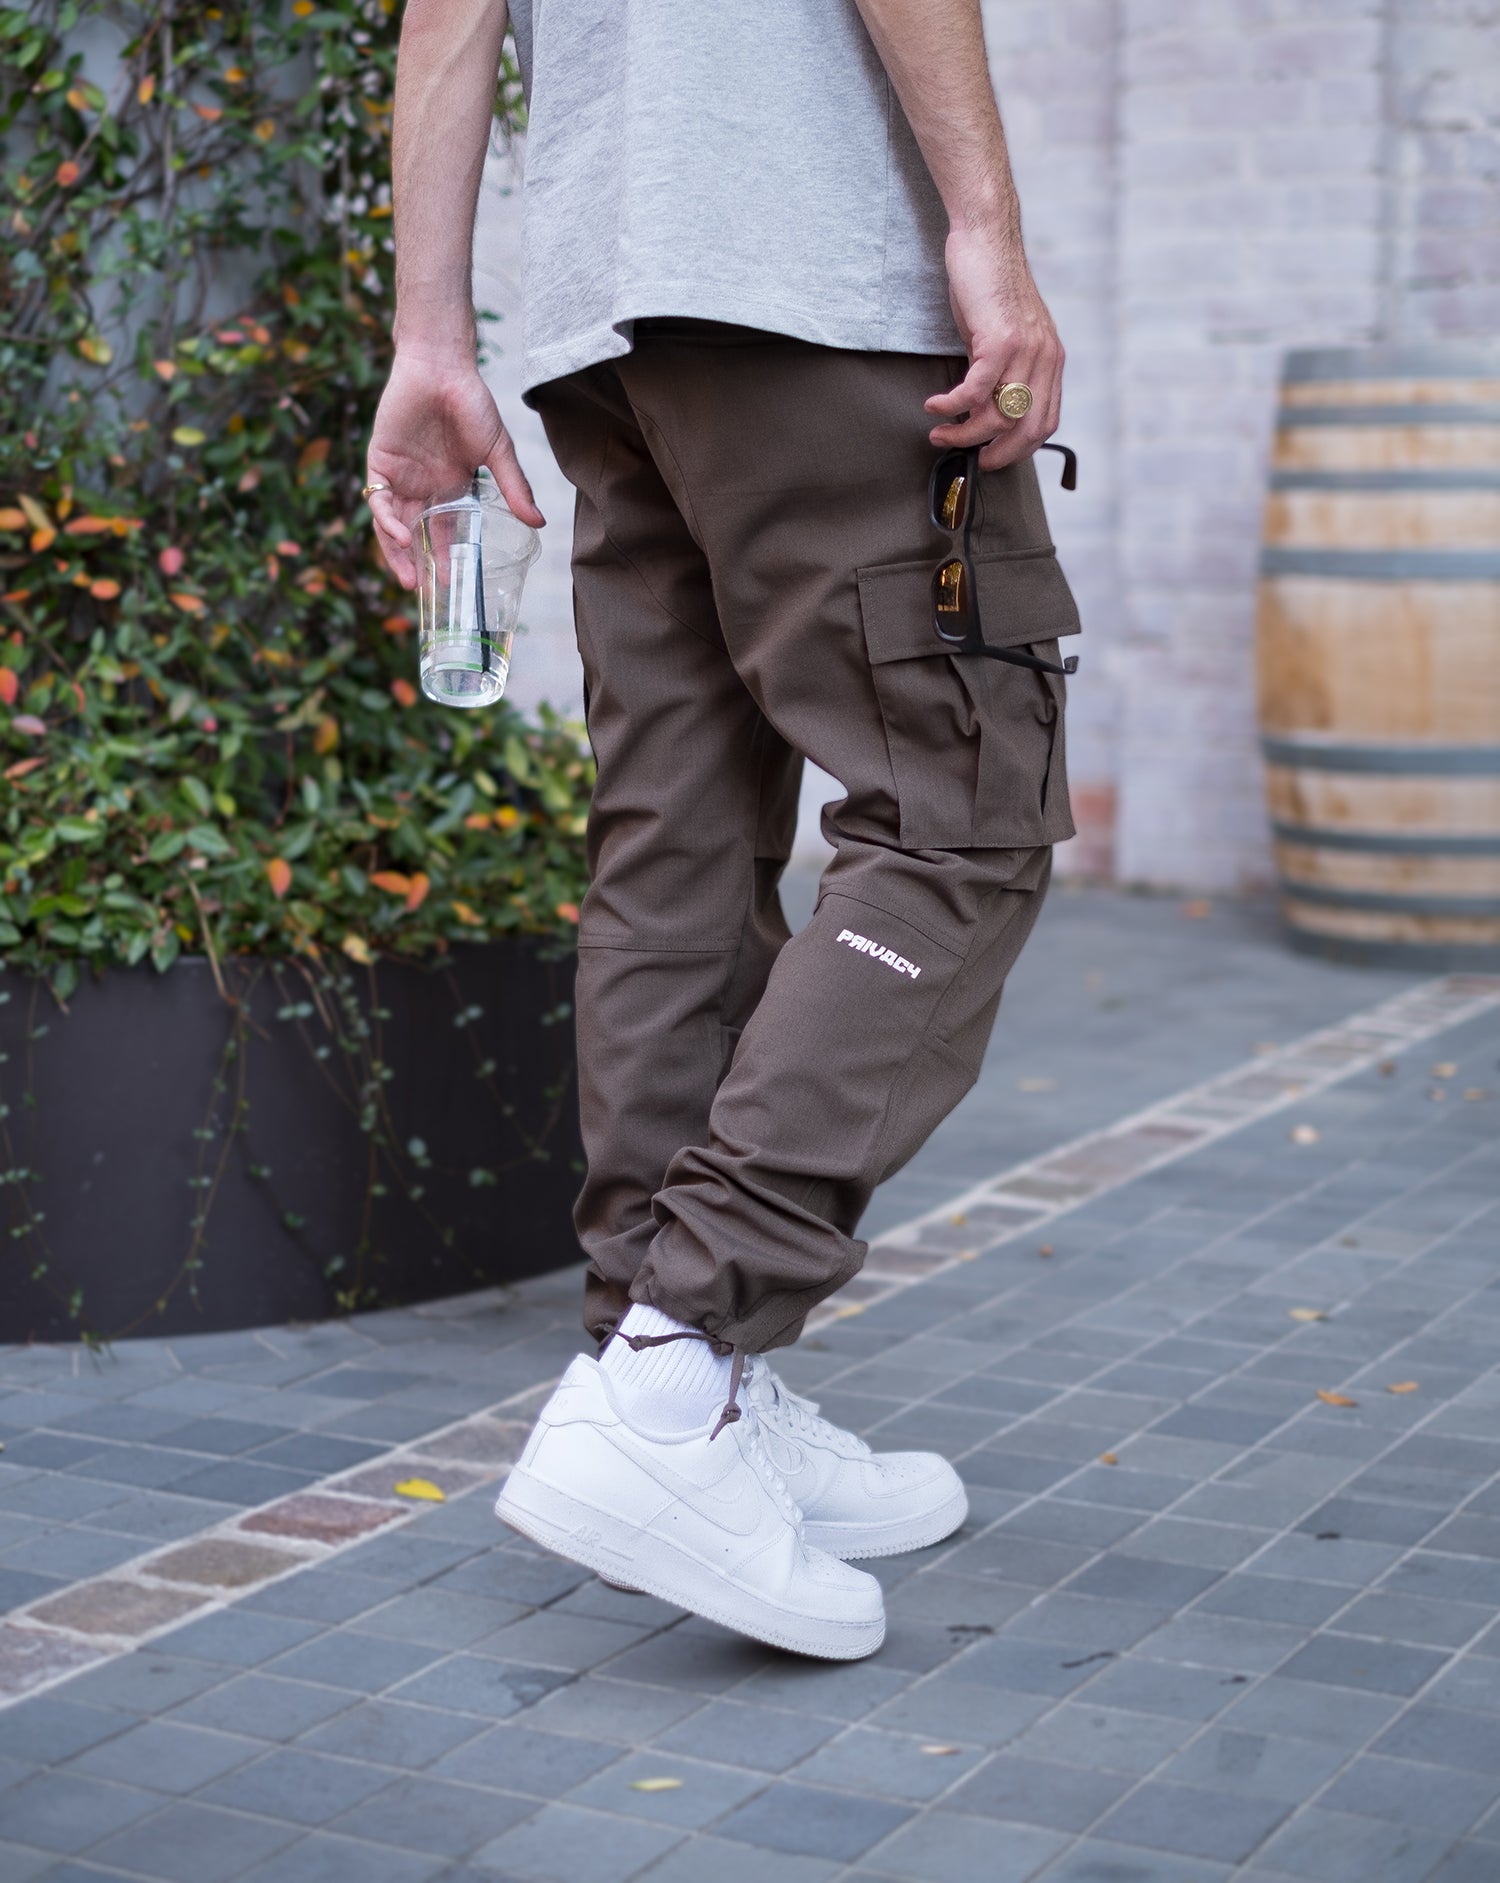 Casual and edgy: Parachute pants are making a comeback